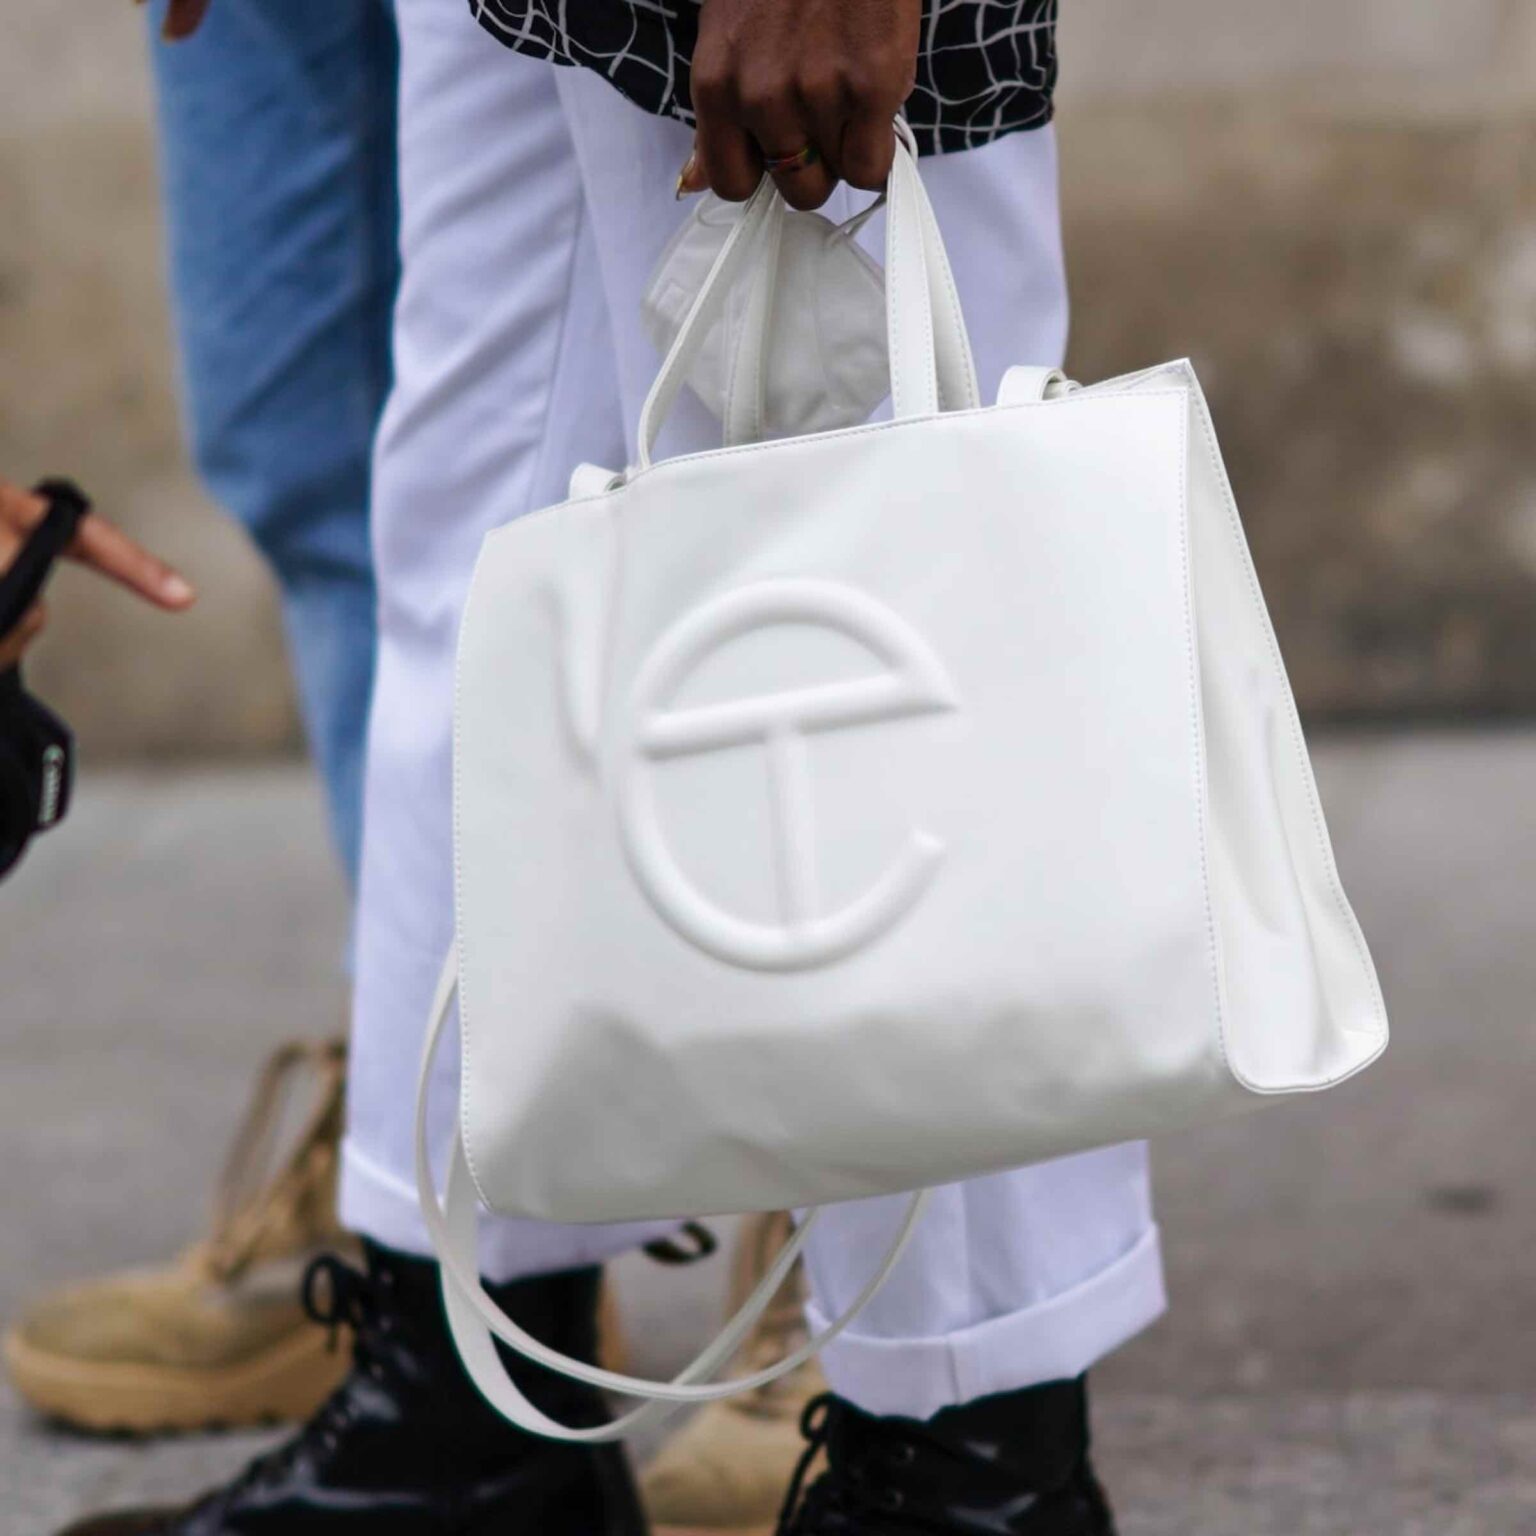 Twitter is going nuts over the new Telfar bags that not even Kim Kardashian can get. Shop til you drop as you dive into these tweets on the new Telfar bags. 